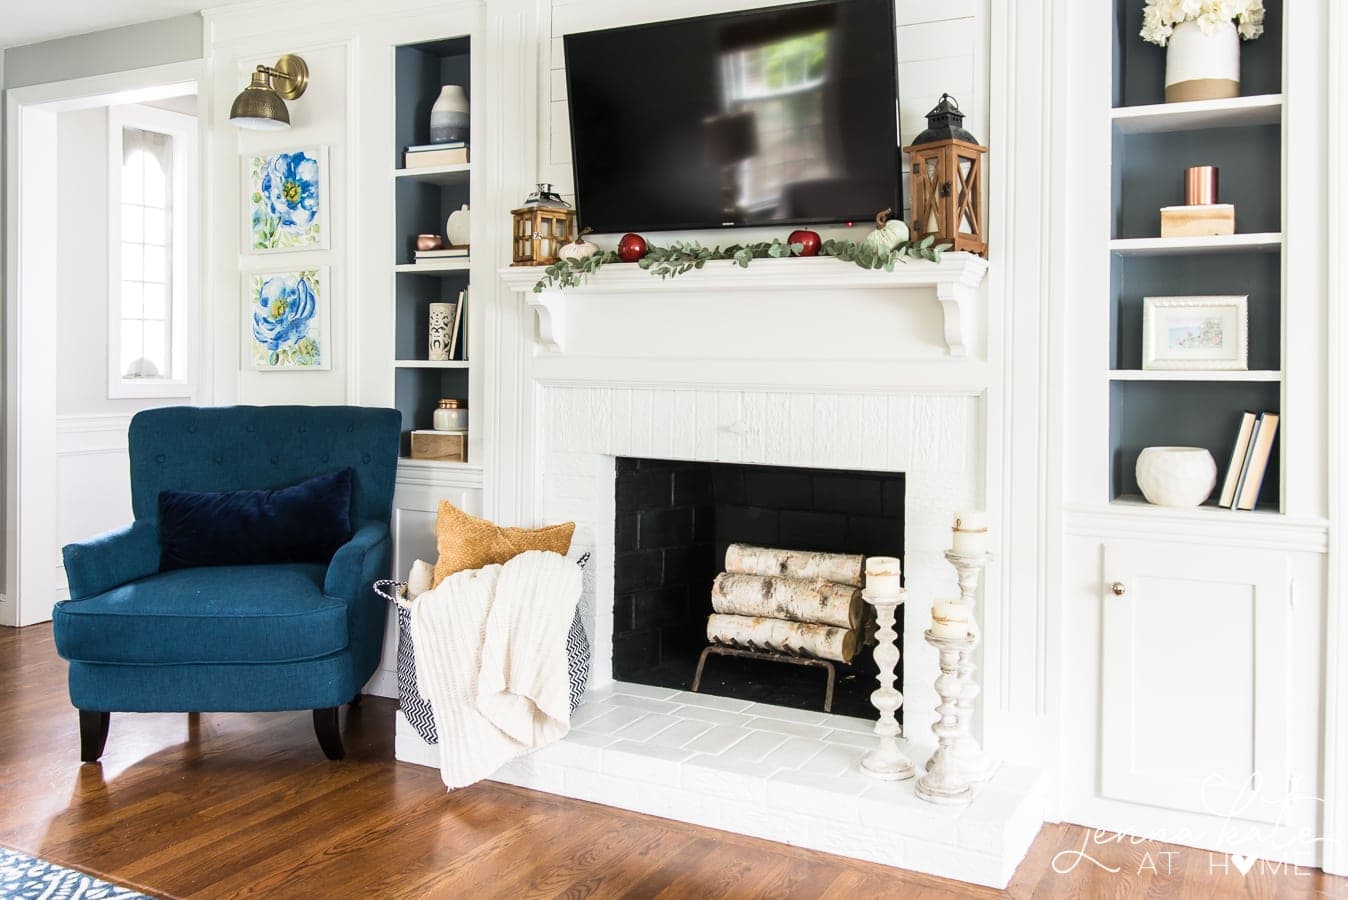 A fireplace with a wall-mounted television, fall decor on the mantel, and a blue armchair nearby